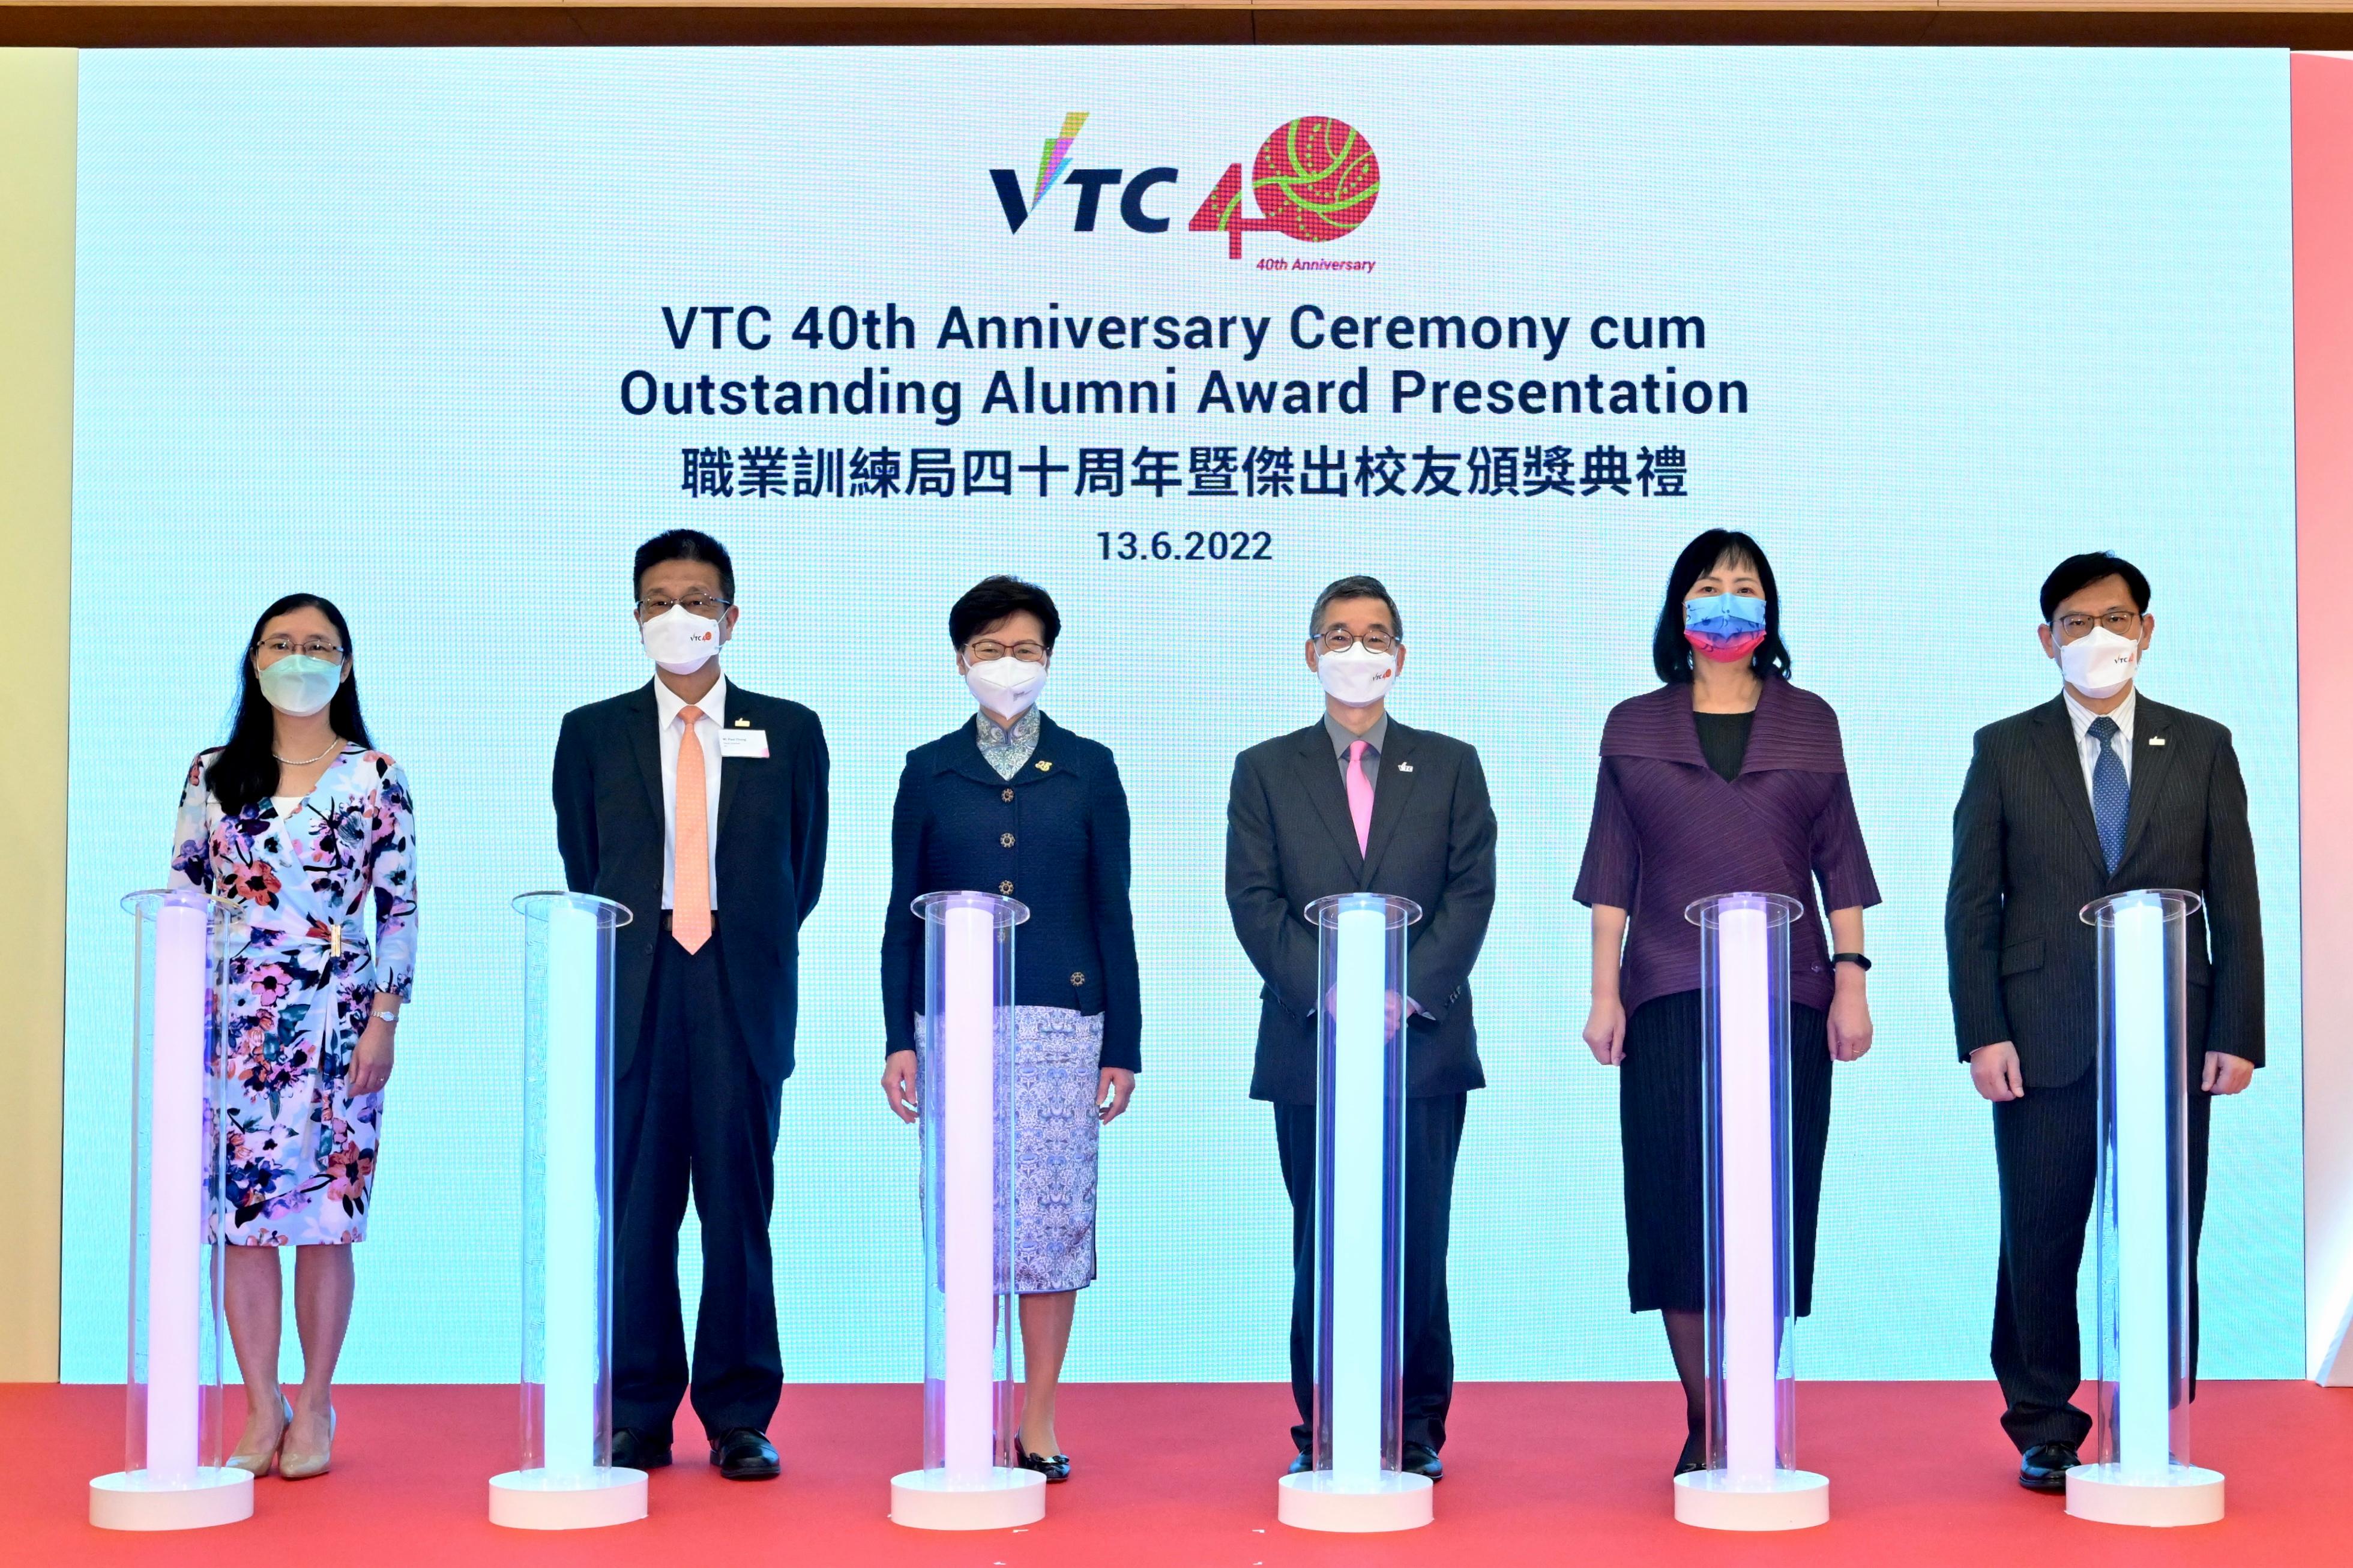 The Chief Executive, Mrs Carrie Lam, attended the VTC 40th Anniversary Ceremony cum Outstanding Alumni Award Presentation today (June 13). Photo shows (from left) the Permanent Secretary for Labour and Welfare, Ms Alice Lau; Deputy Chairman of the Vocational Training Council (VTC) Mr Paul Chong; Mrs Lam; the Chairman of the VTC, Mr Tony Tai; the Permanent Secretary for Education, Ms Michelle Li; and the Executive Director of the VTC, Mr Donald Tong, officiating at the ceremony.